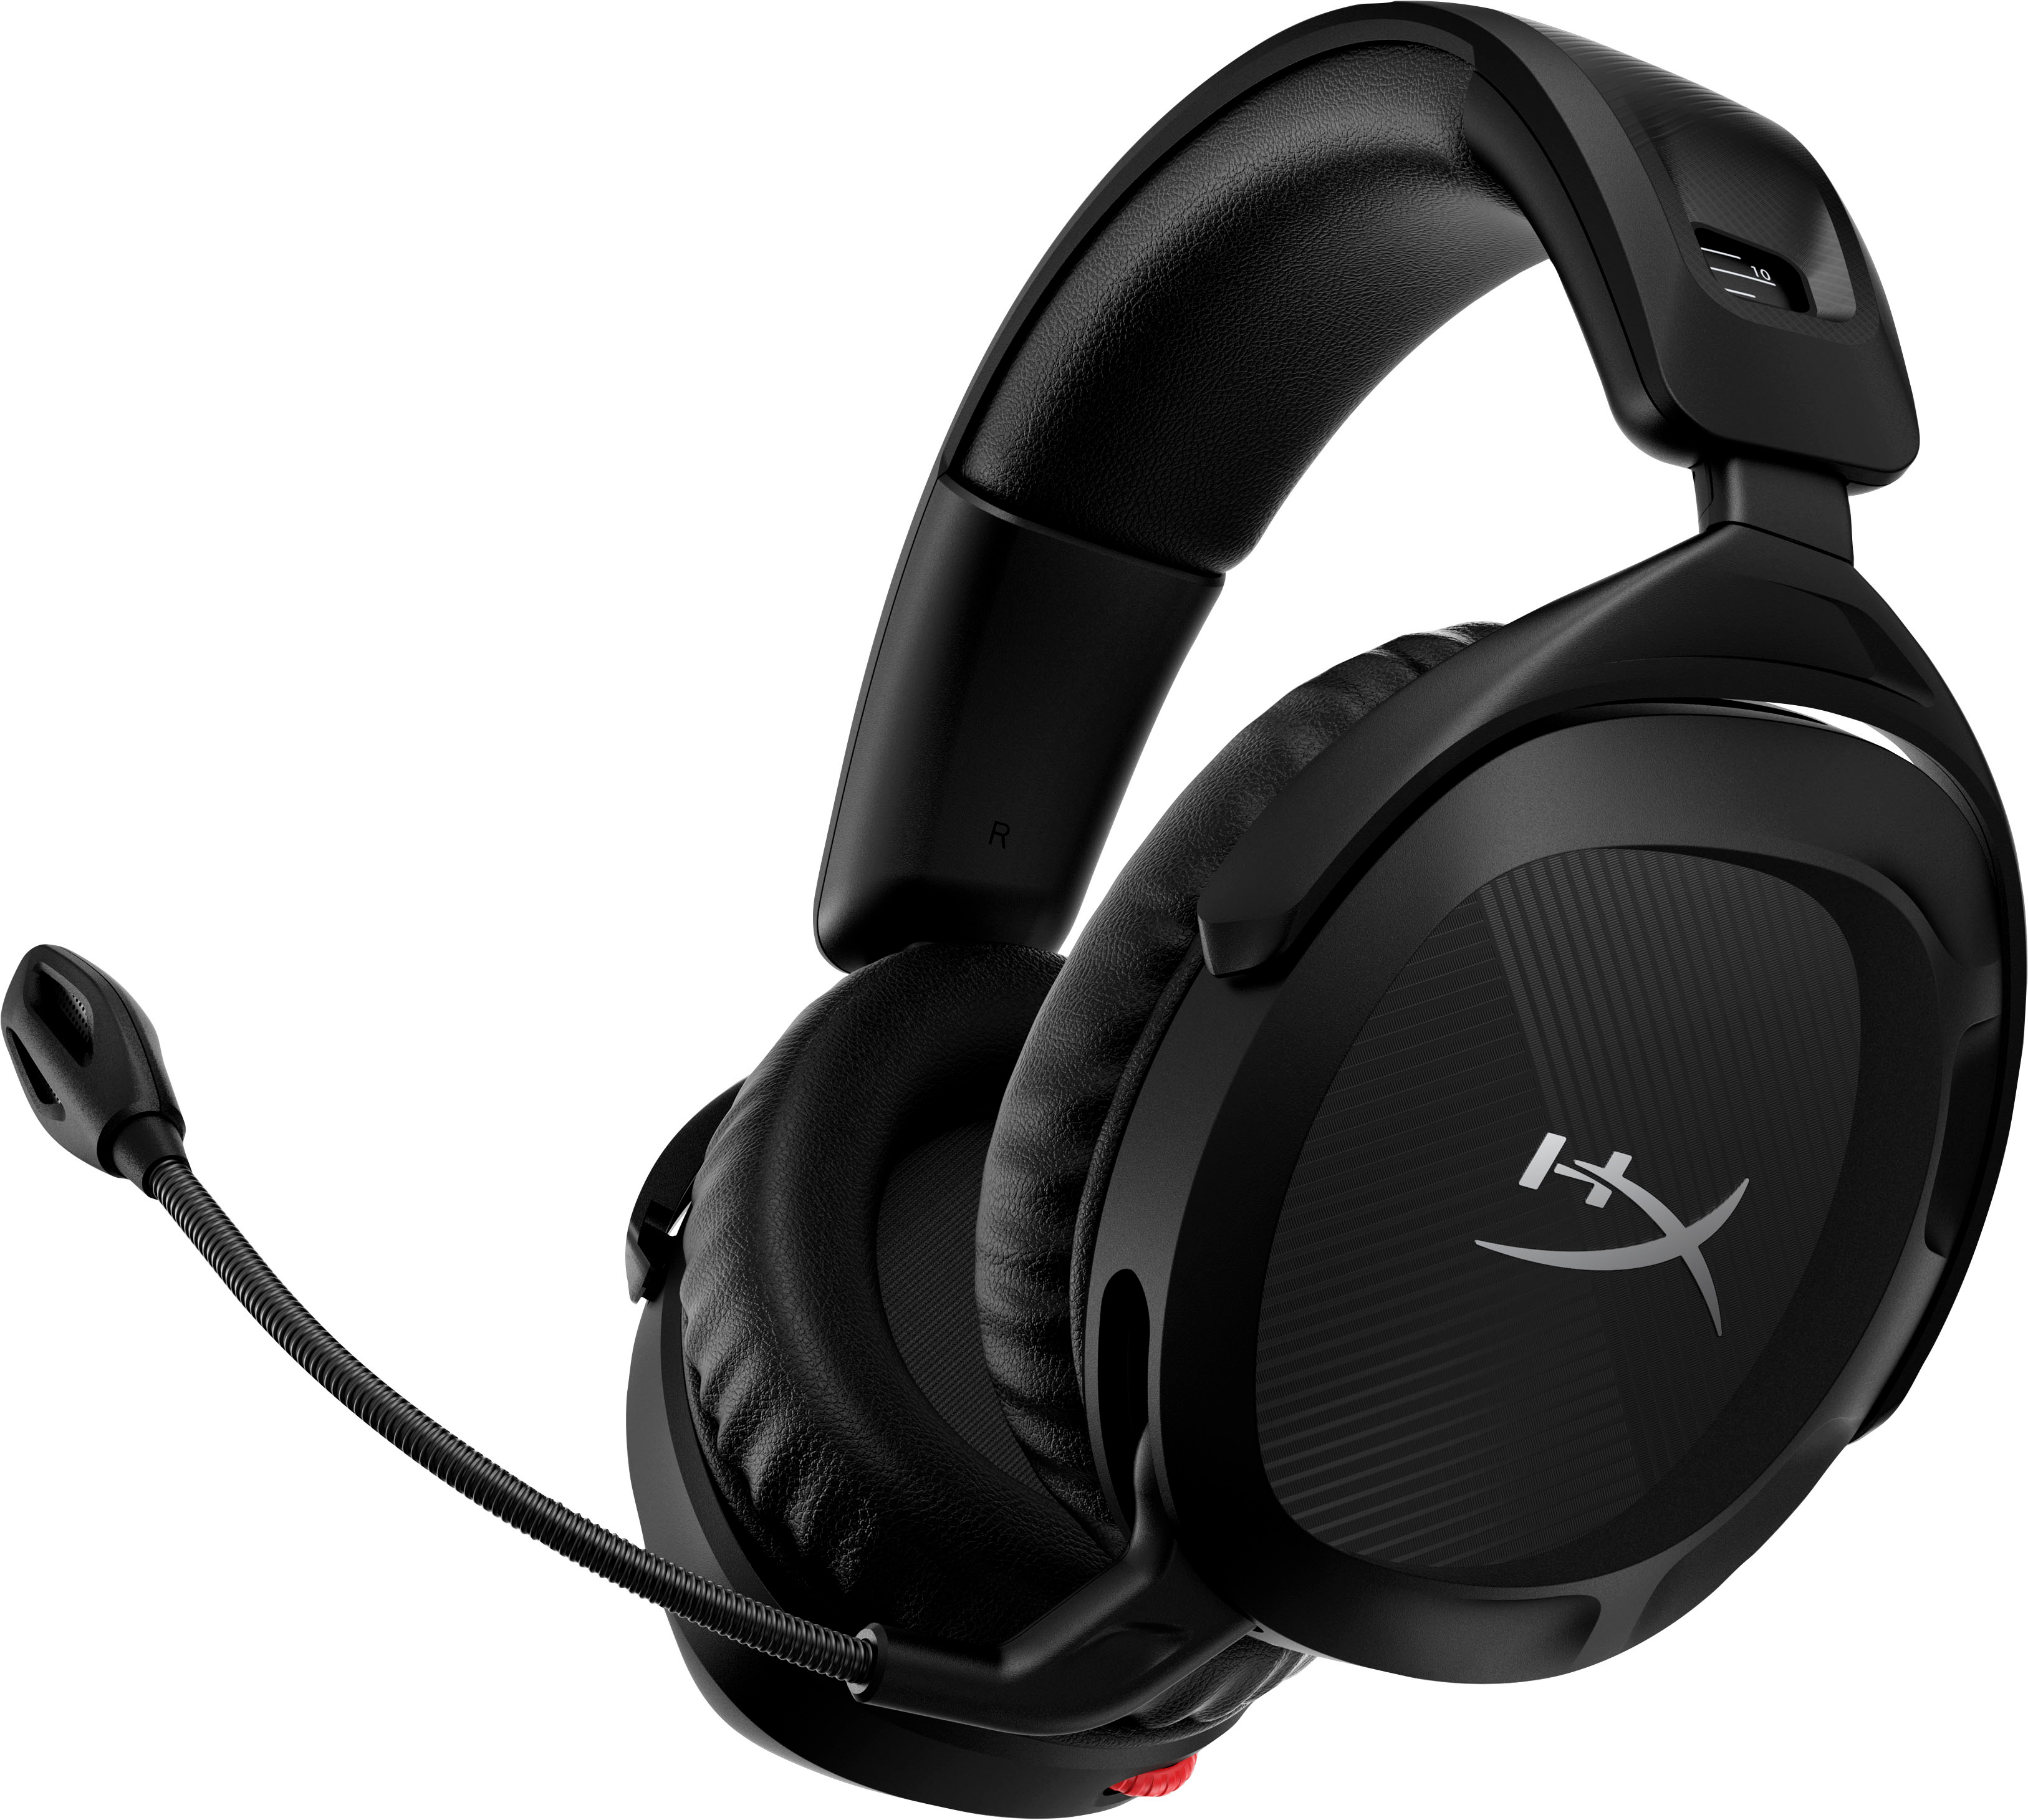  HyperX Cloud Stinger – Gaming Headset, Lightweight, Comfortable  Memory Foam, Swivel to Mute Noise-Cancellation Mic, Works on PC, PS4, PS5,  Xbox One/Series X